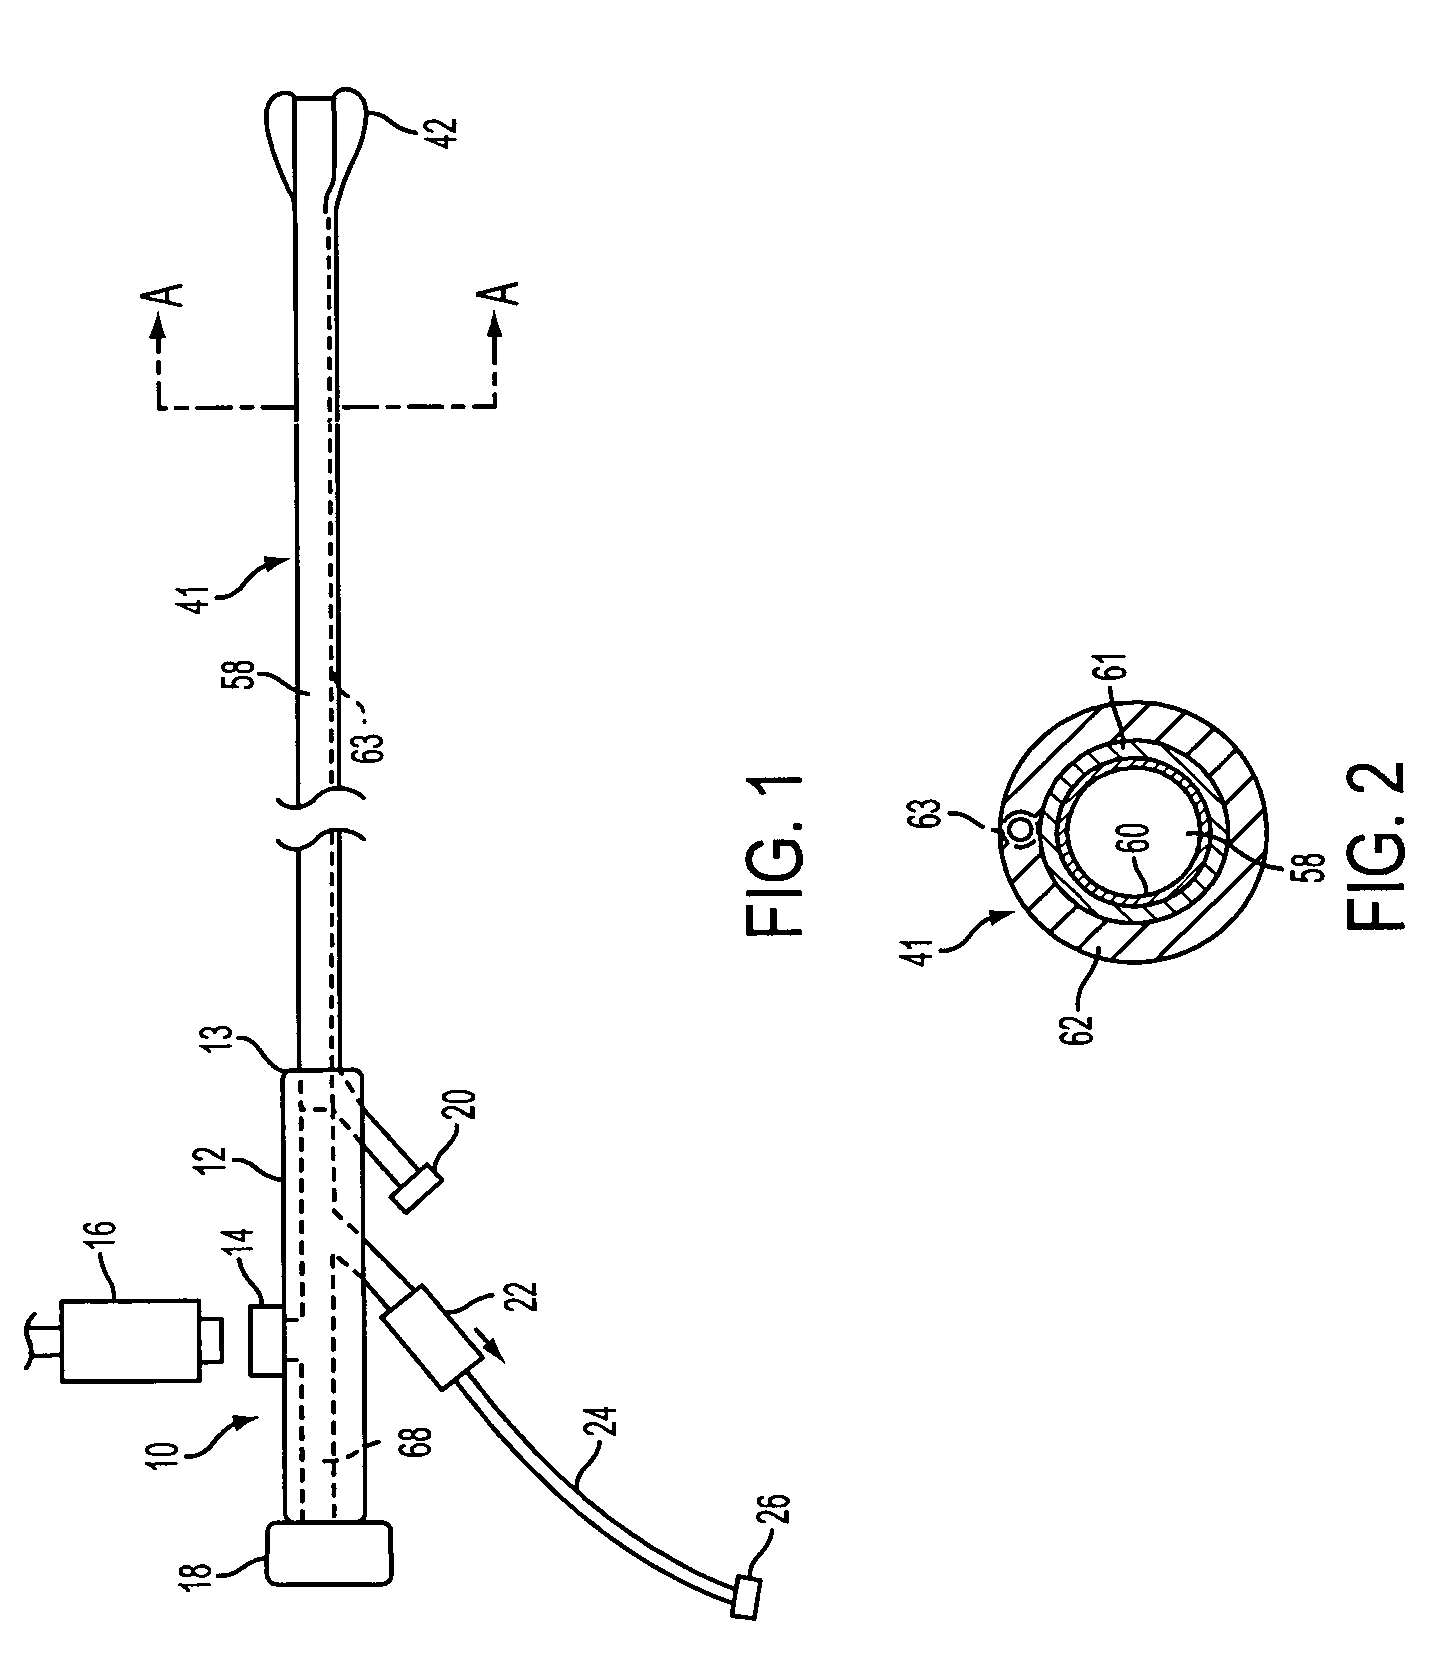 Proximal catheter assembly allowing for natural and suction-assisted aspiration